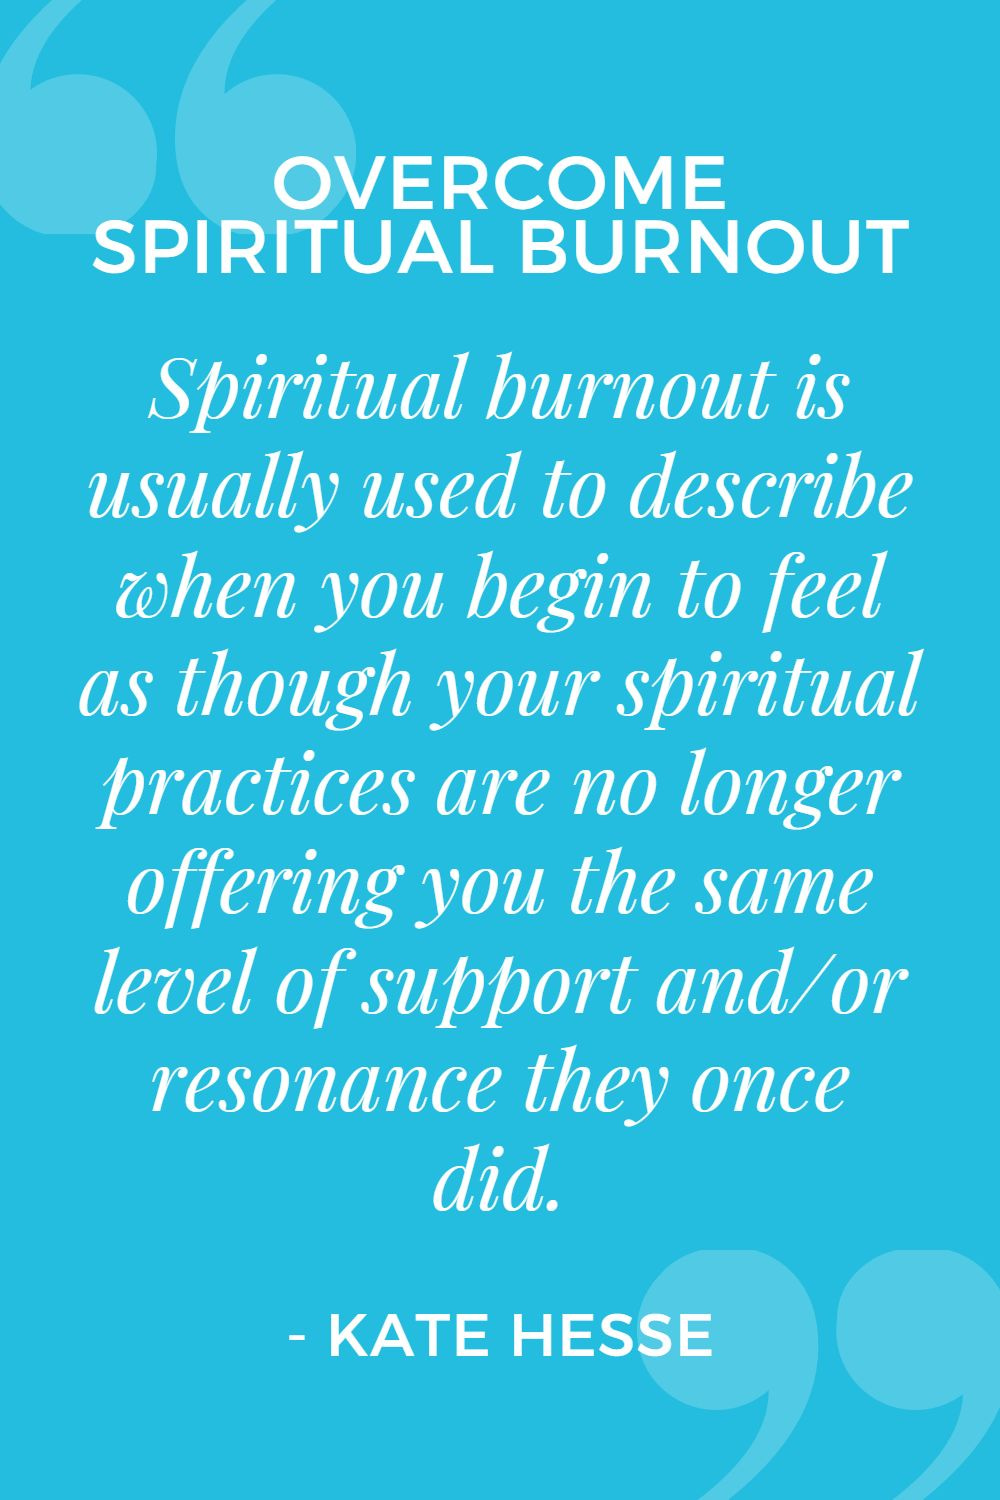 Spiritual burnout is usually used to describe when you begin to feel as though your spiritual practices are no longer offering you the same level of support and/or resonance they once did.